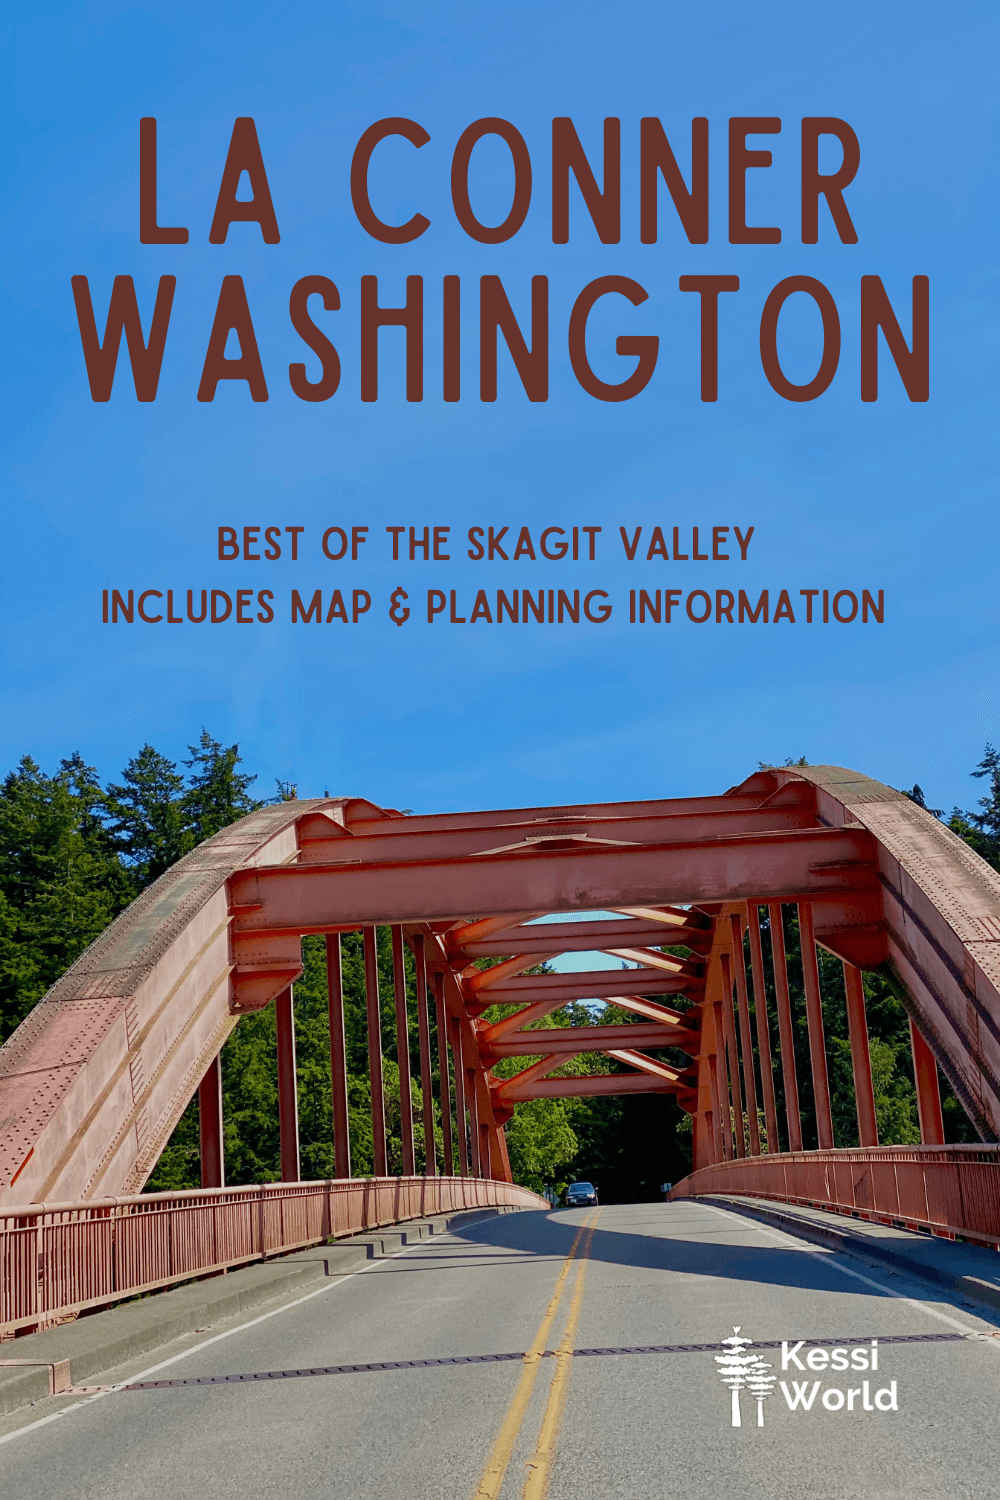 This Pinterest pin shows the pink colored Rainbow Bridge, which connects the Swinomish Village with the town of La Conner, Washington.  The sky above is blue and road on the bridge is gray pavement with a car coming in the distance. 